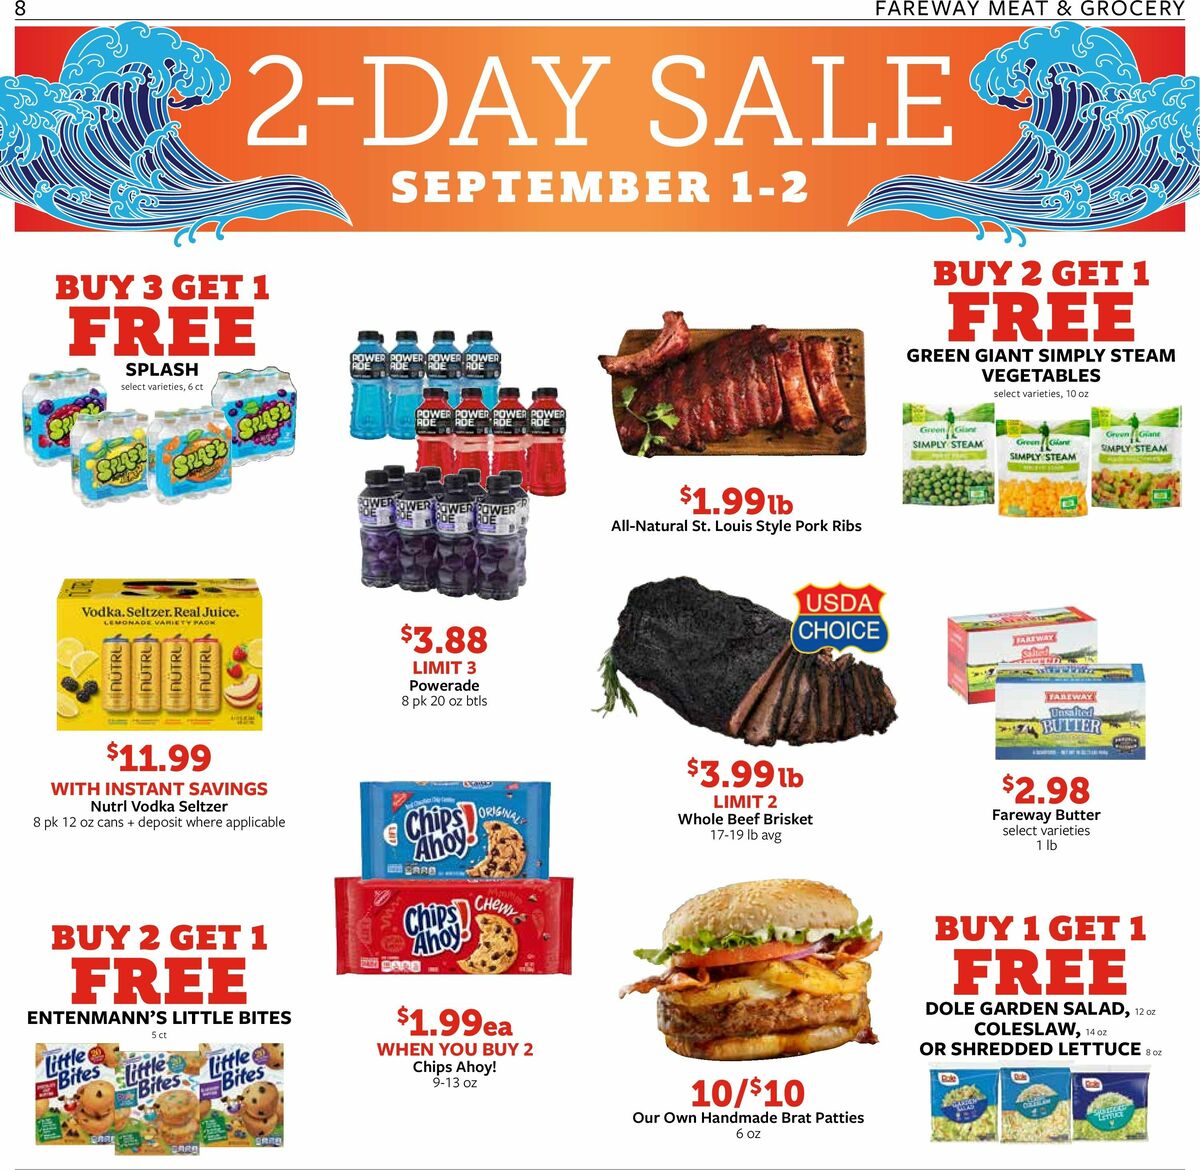 Fareway 2 Day Sale Weekly Ad from September 1